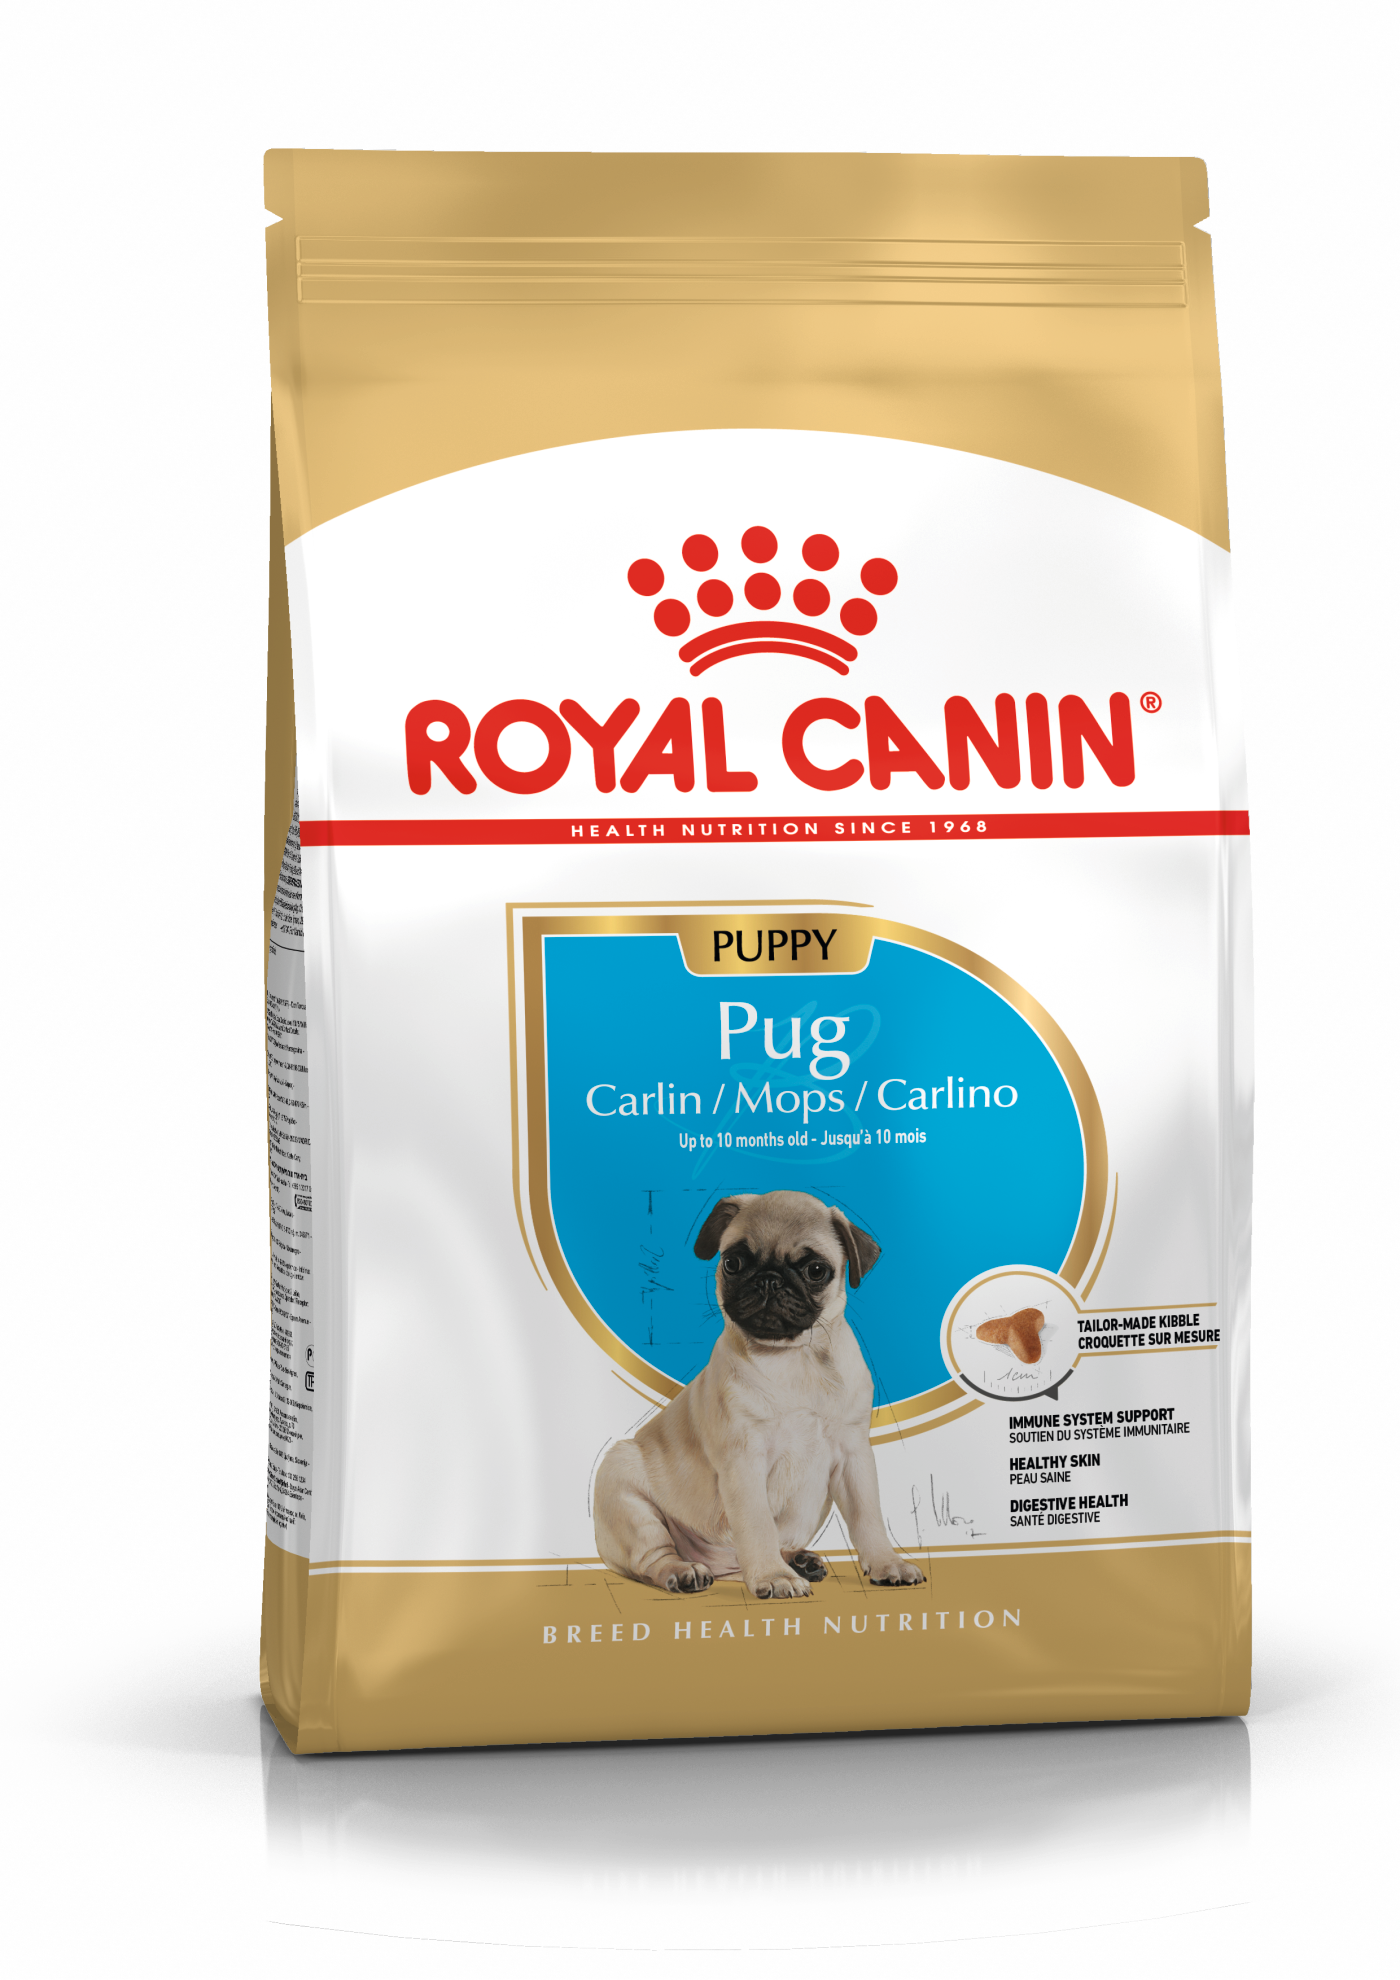 Pack shot of Pug puppy product